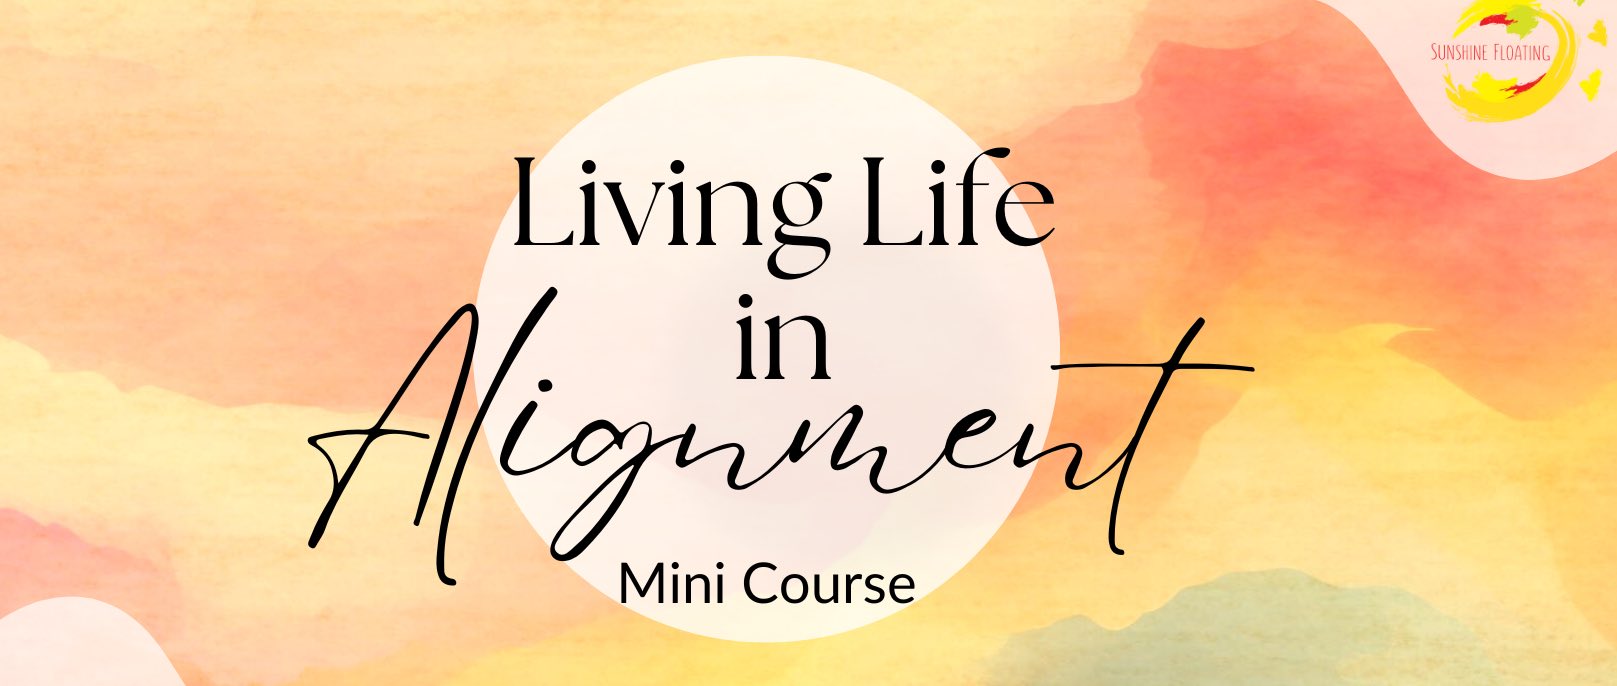 living-life-in-alignment-mini-course_free-wellbeing-resources-sunshinefloating_02